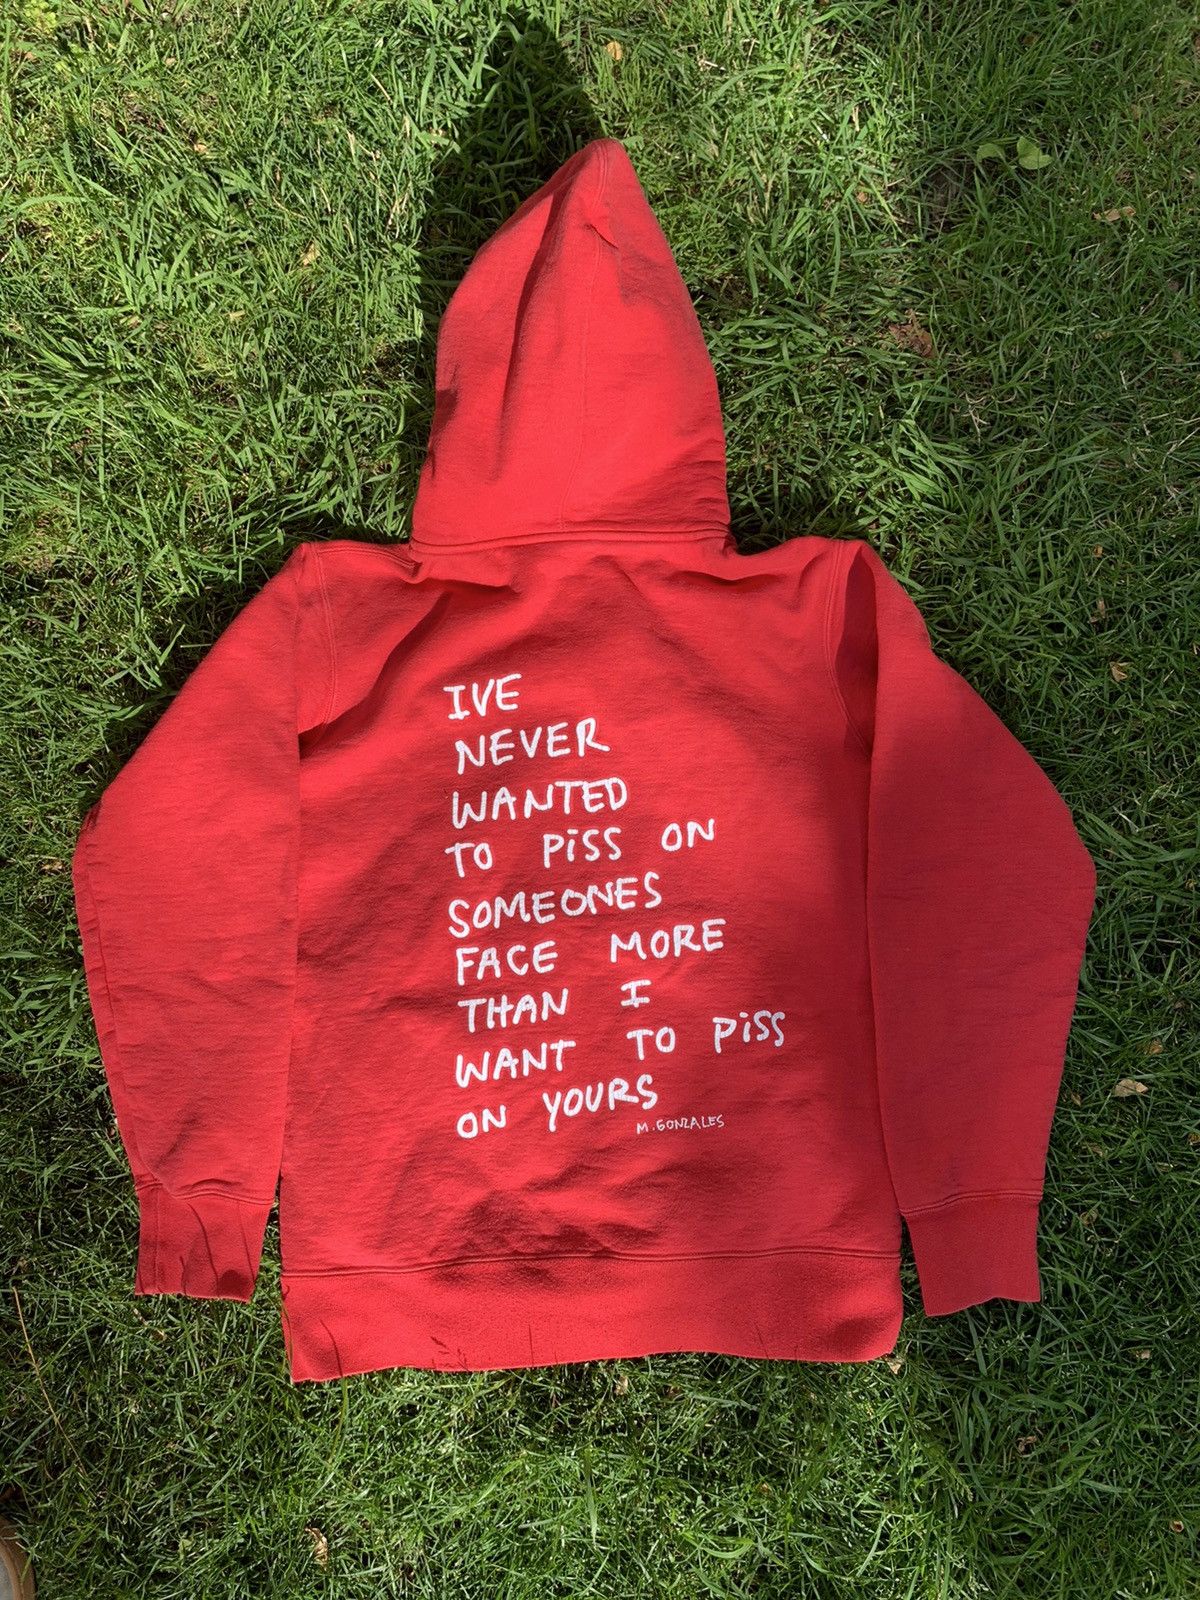 Supreme FW13 Mark Gonzales Piss Face Zip-Up Hoodie in Red | Grailed